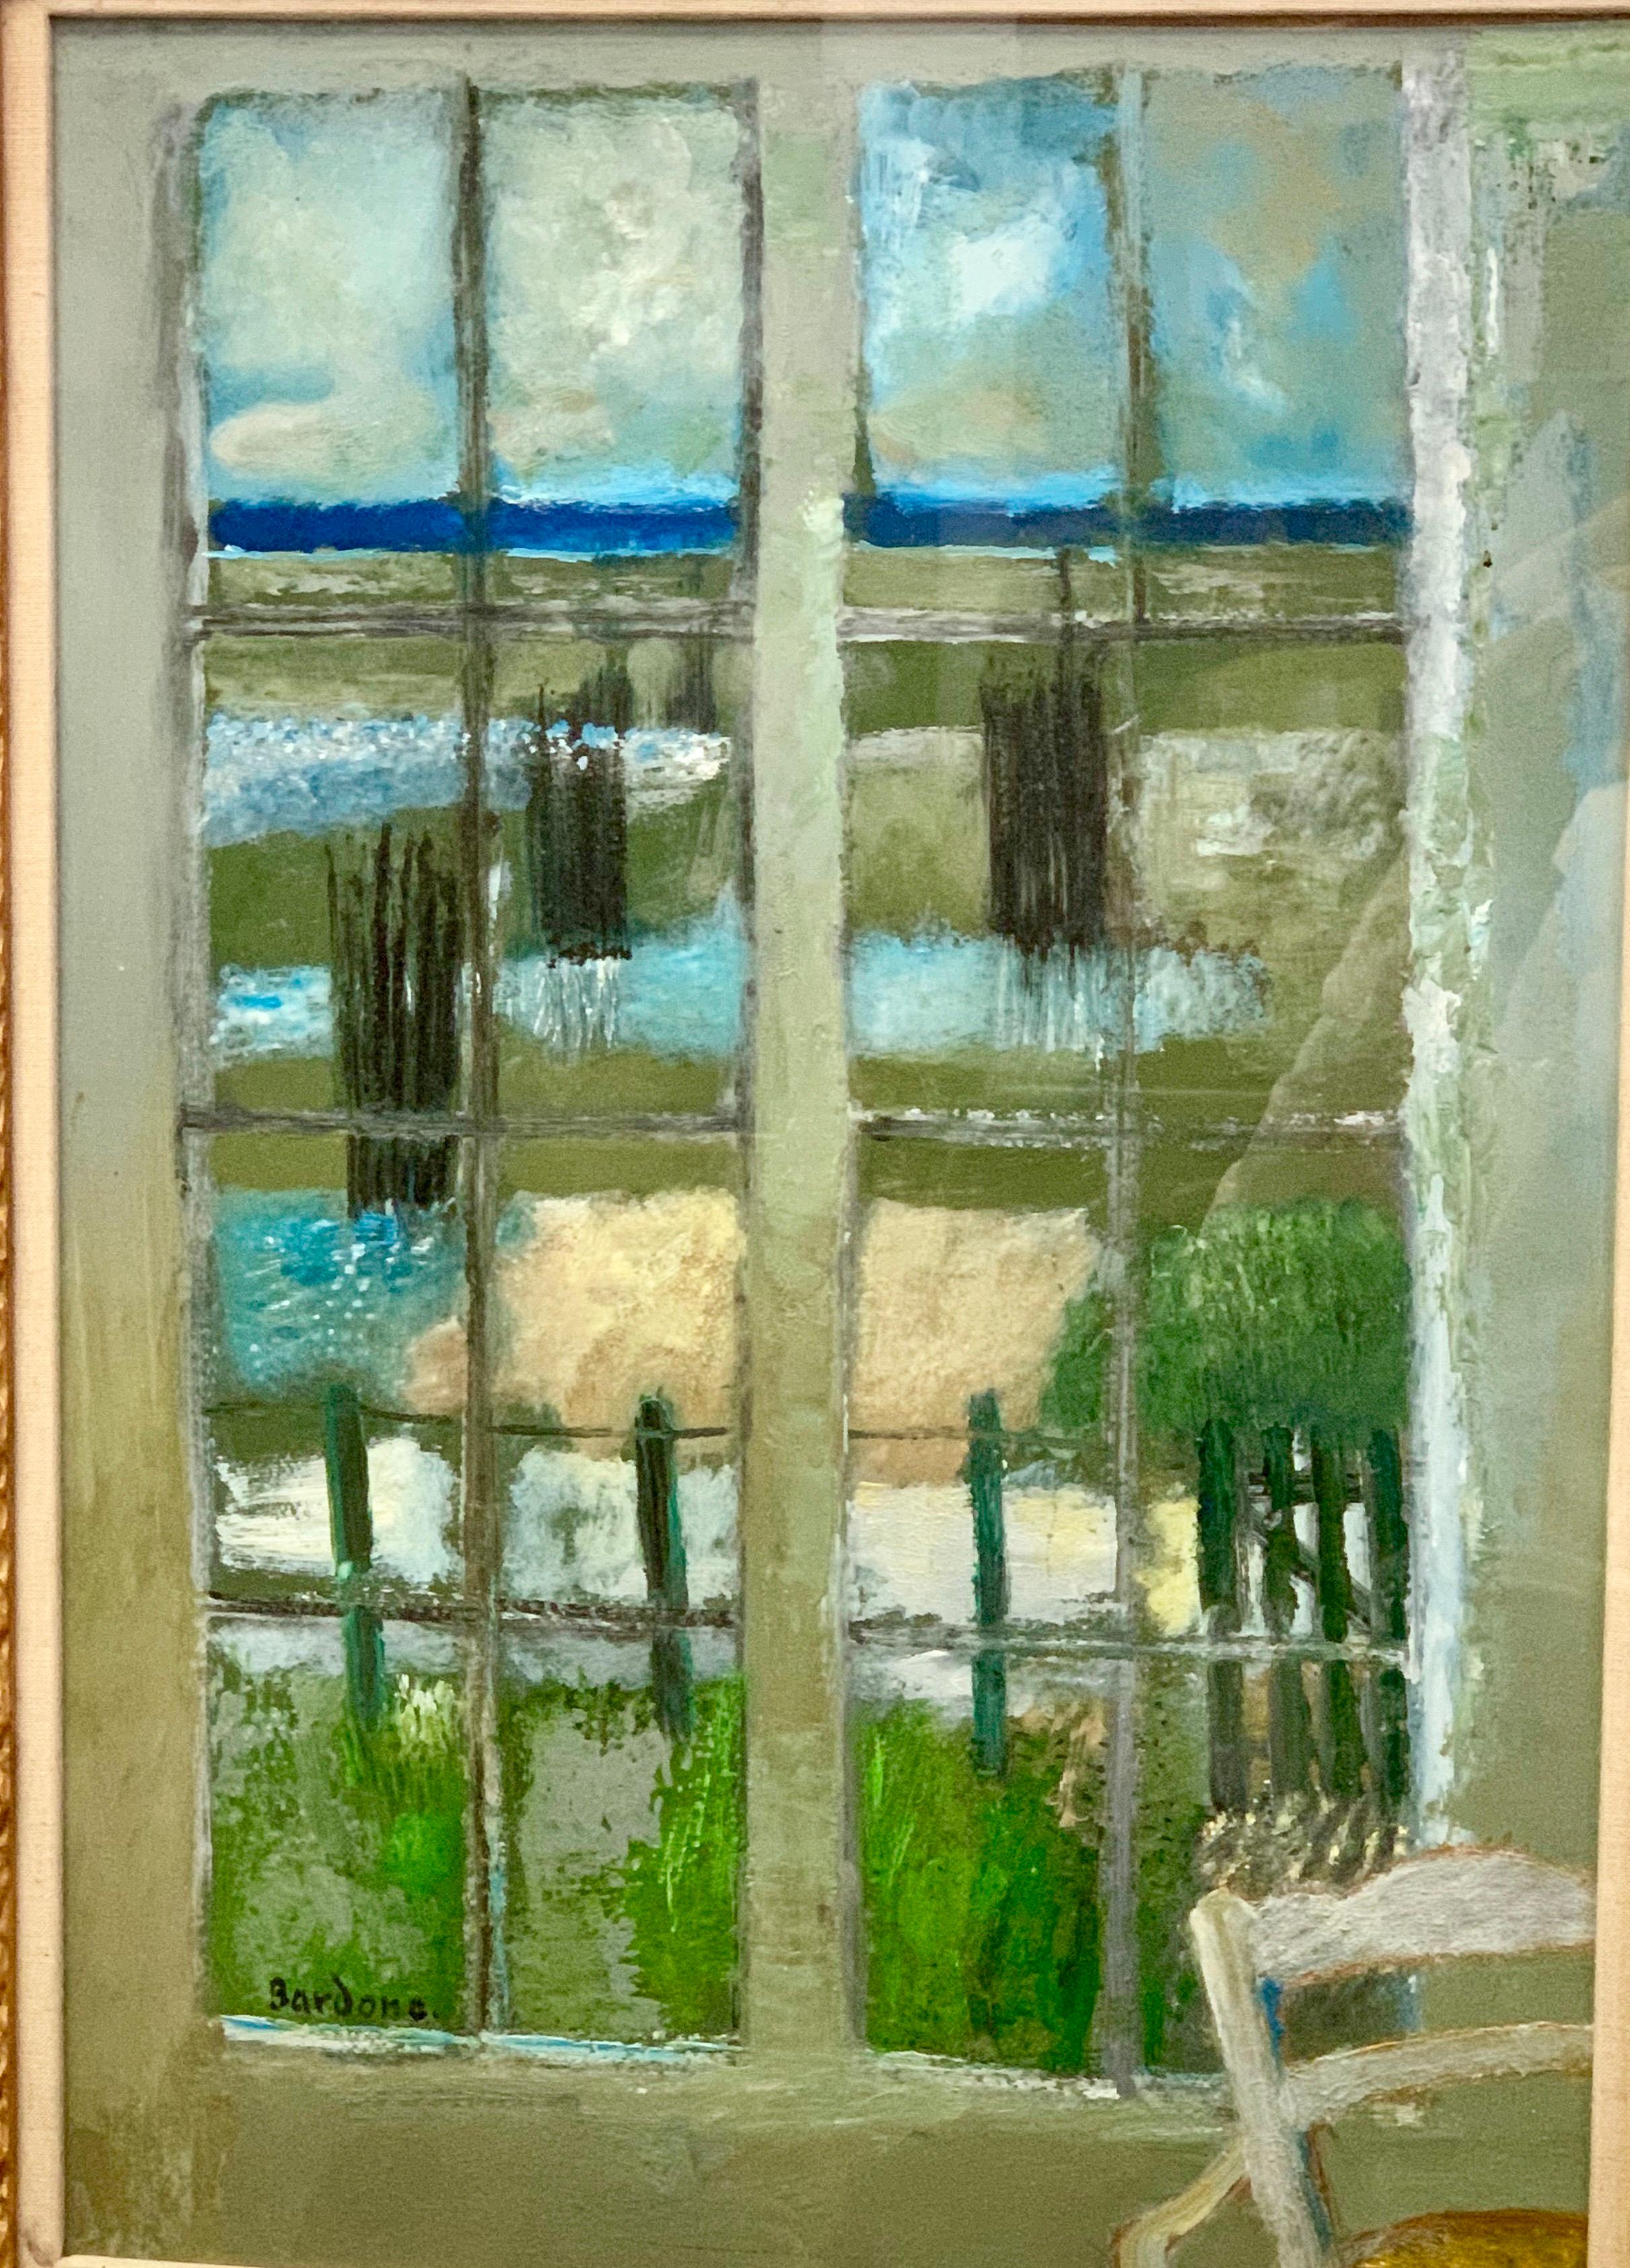 Guy Bardone 
French, 1927-2015
La Fenêtre (The window)

Oil on canvas.

Guy Bardone was born in 1927 in Saint-Claude, France. Bardone studied at the Ecole National Supérieure des Arts Decoratifs in Paris where he trained under Brianchon, Cavailles